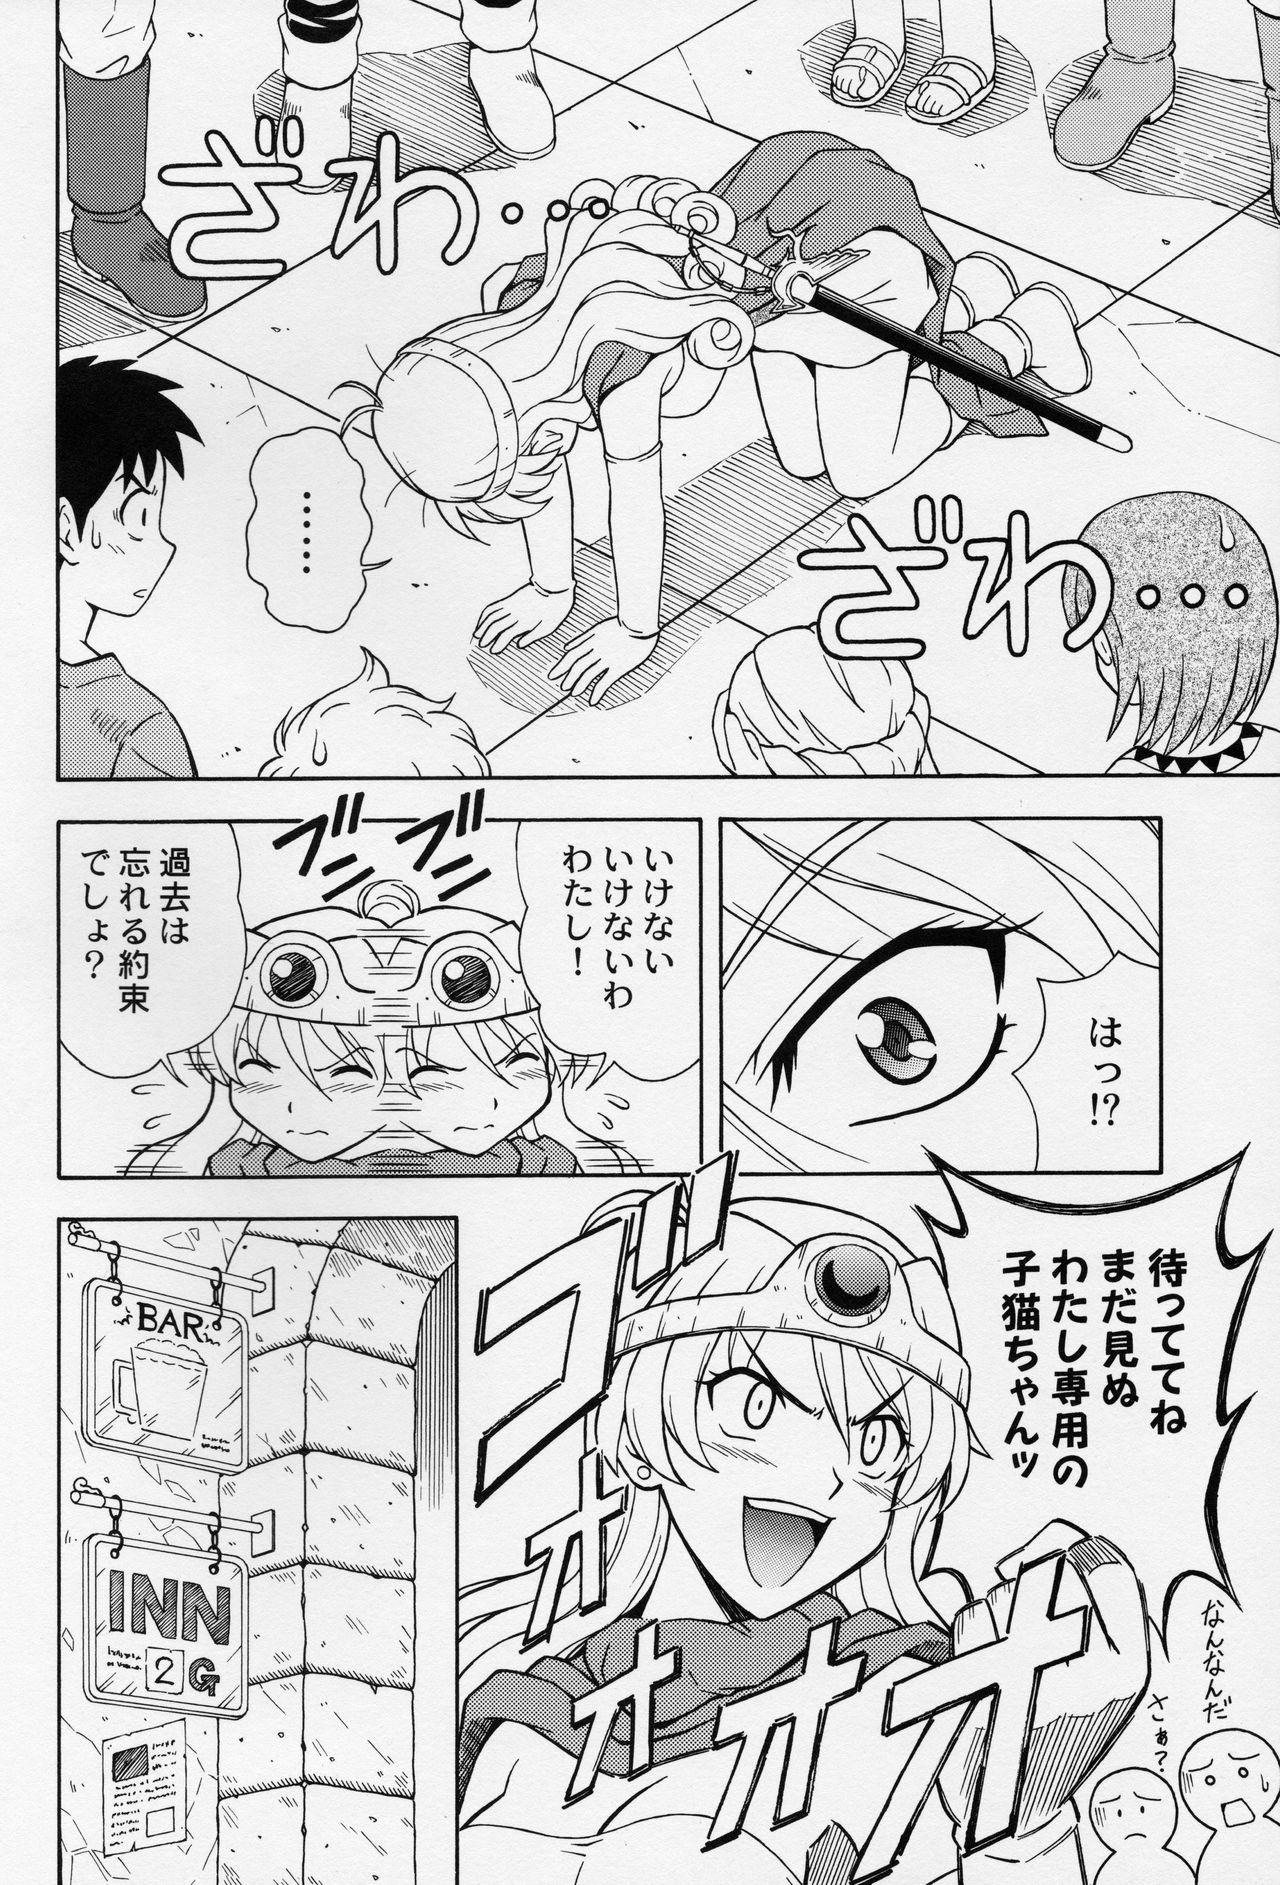 Babes Moe Moe Quest Z Vol. 2 - Dragon quest iii Eating - Page 9